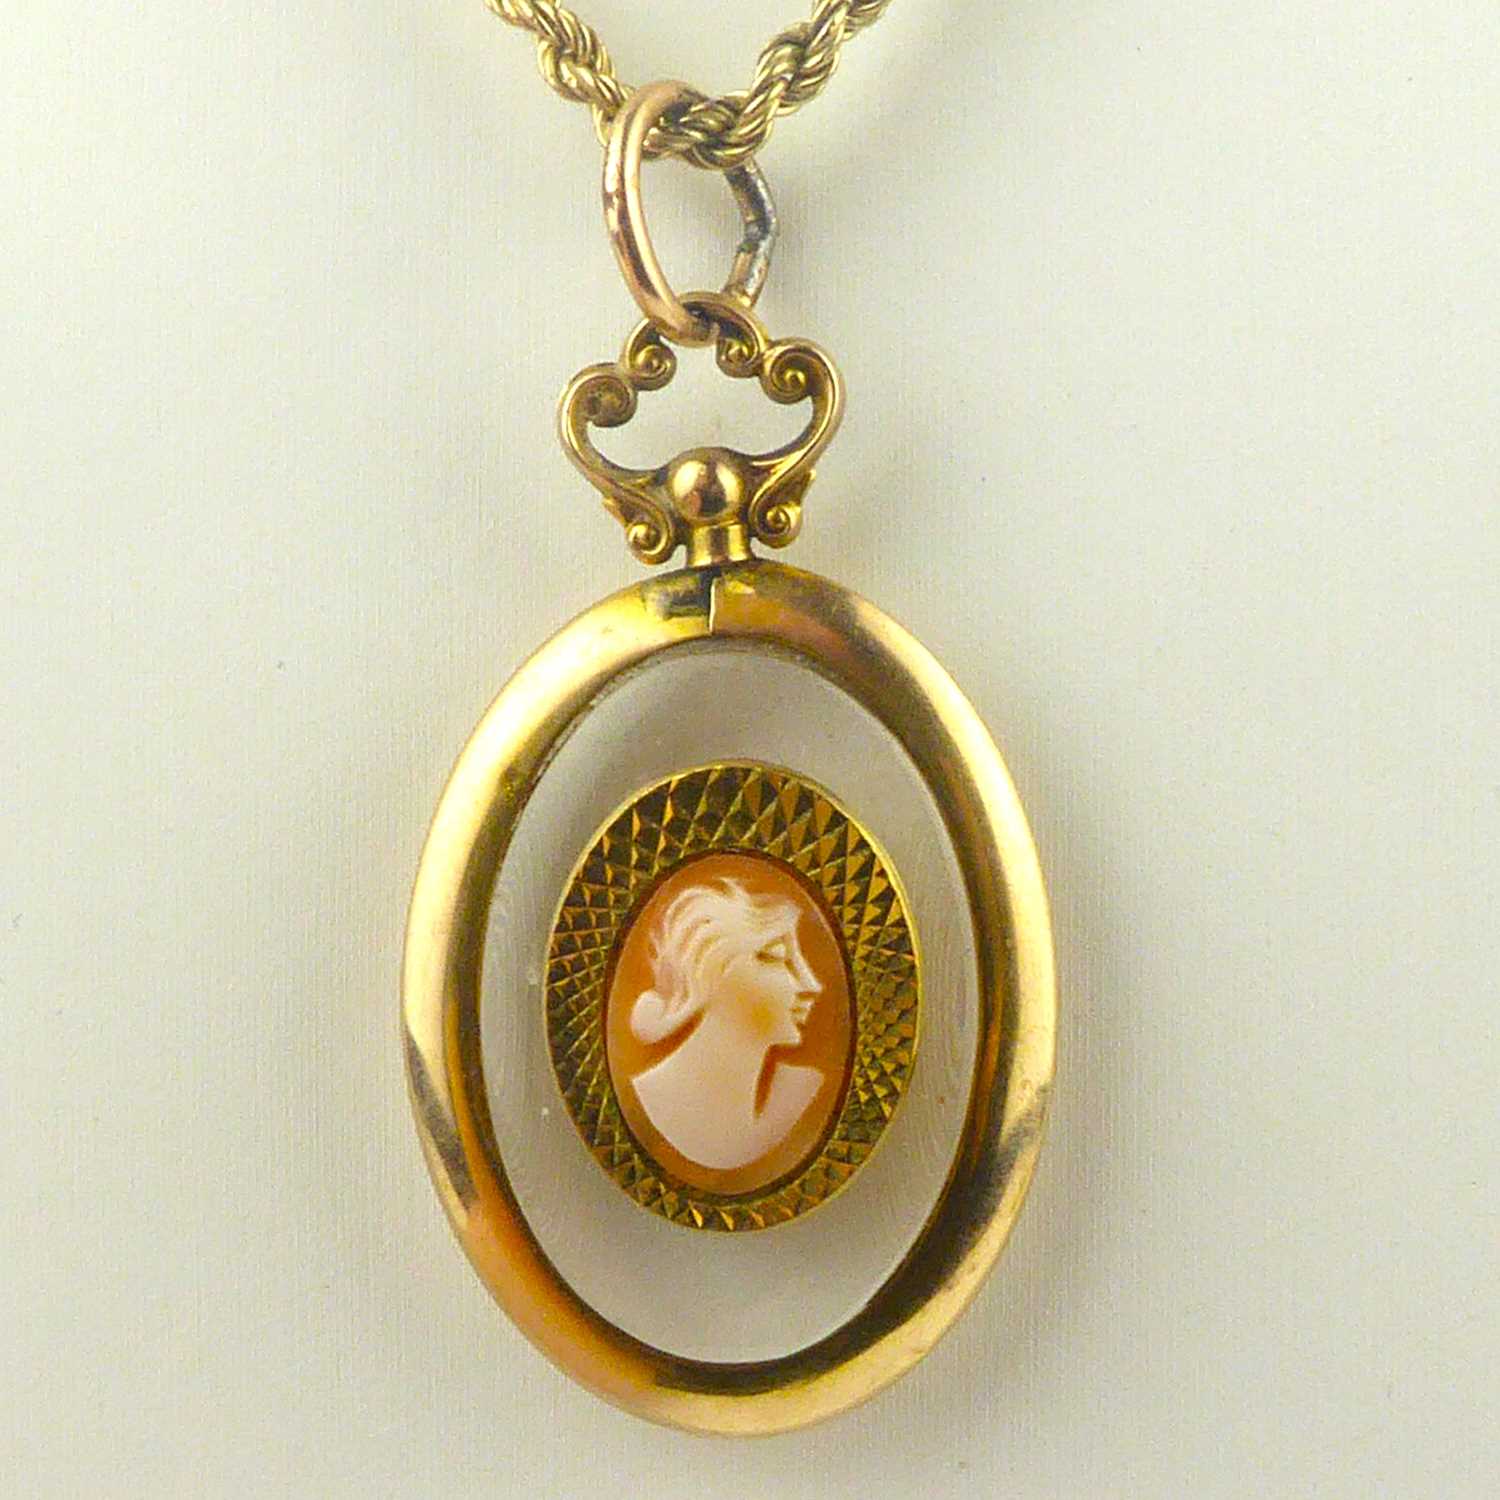 A clear oval necklace pendant in a 9ct gold mount, with a later applied cameo and gold-coloured - Image 2 of 4